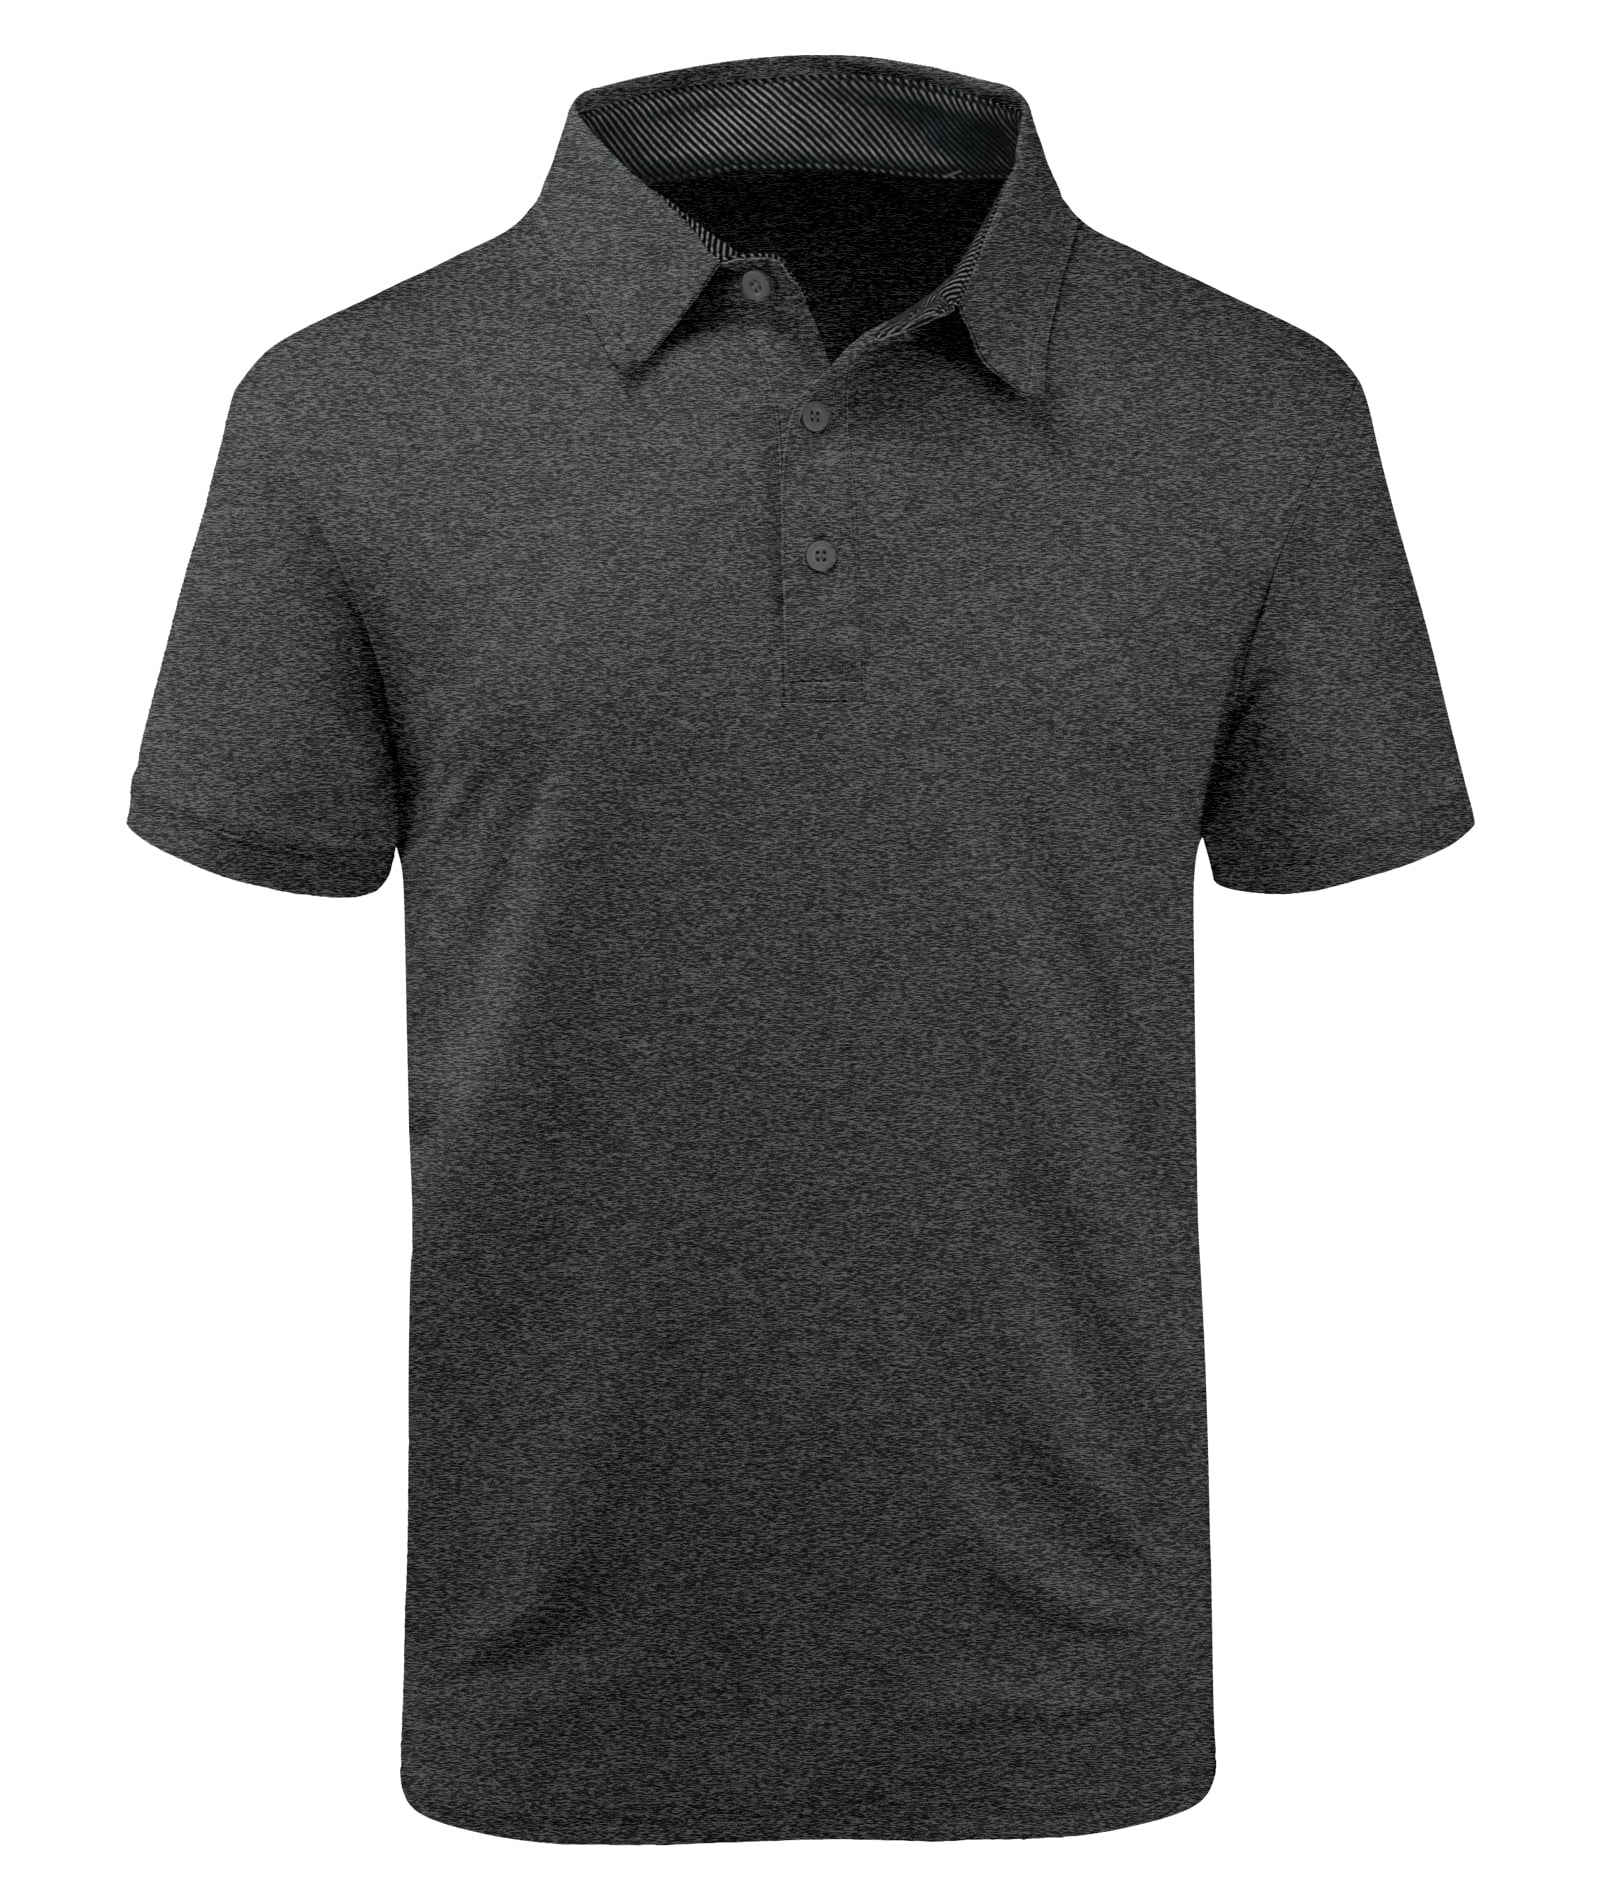 SCODI Men's Polo Shirts Solid Color Short Sleeve Casual Shirts for Men ...